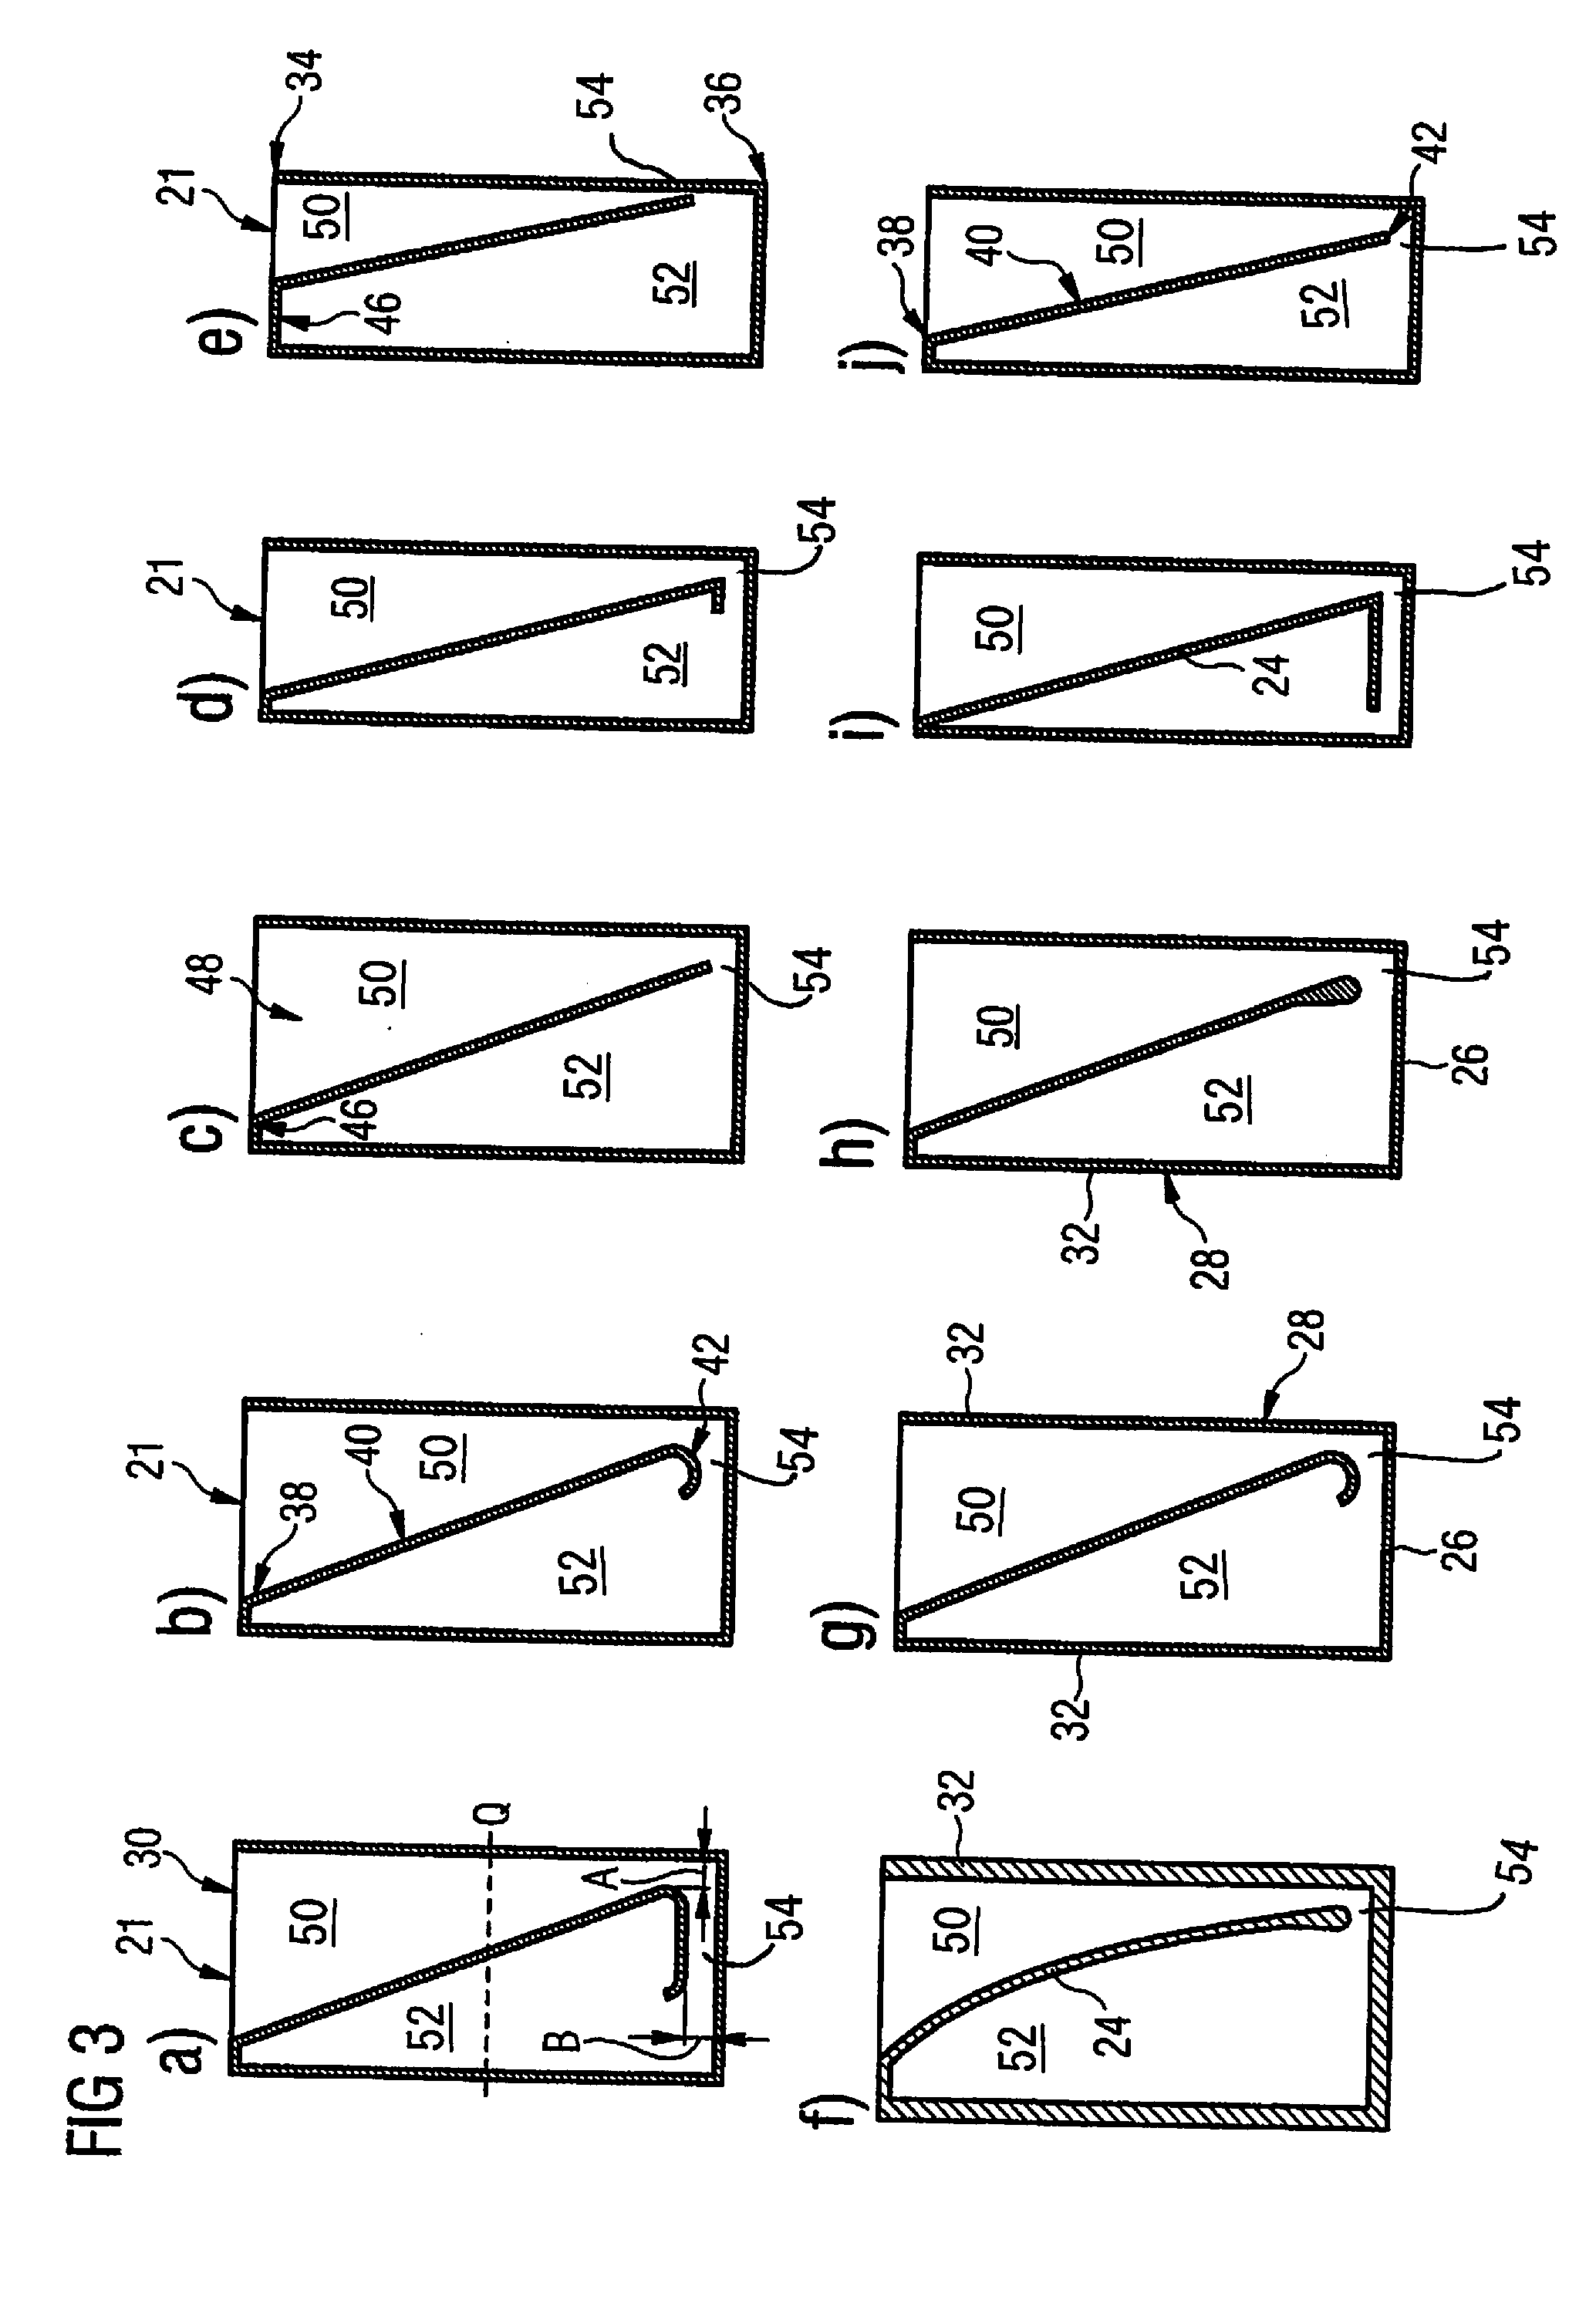 Sound absorber, sound absorber assembly and an engine with a sound absorber assembly